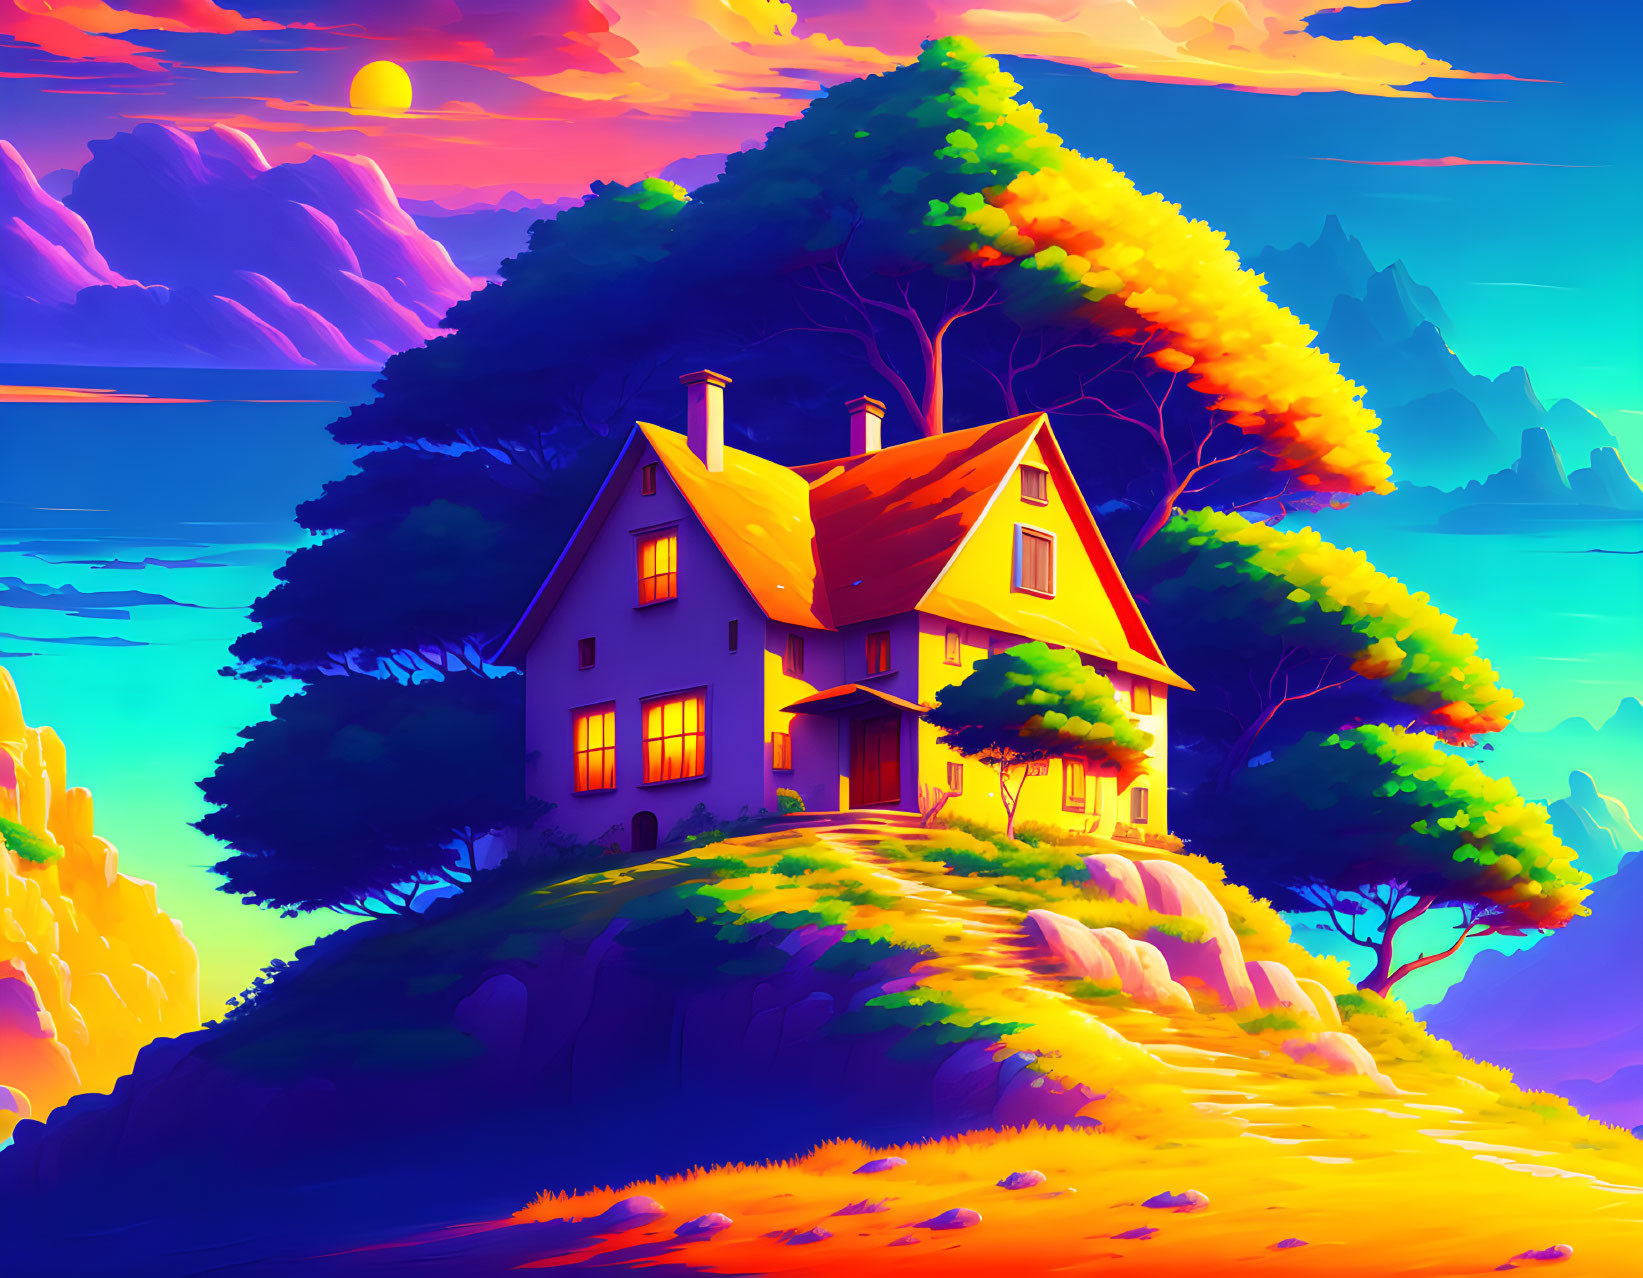 Colorful digital illustration of cozy house on hilltop at sunset